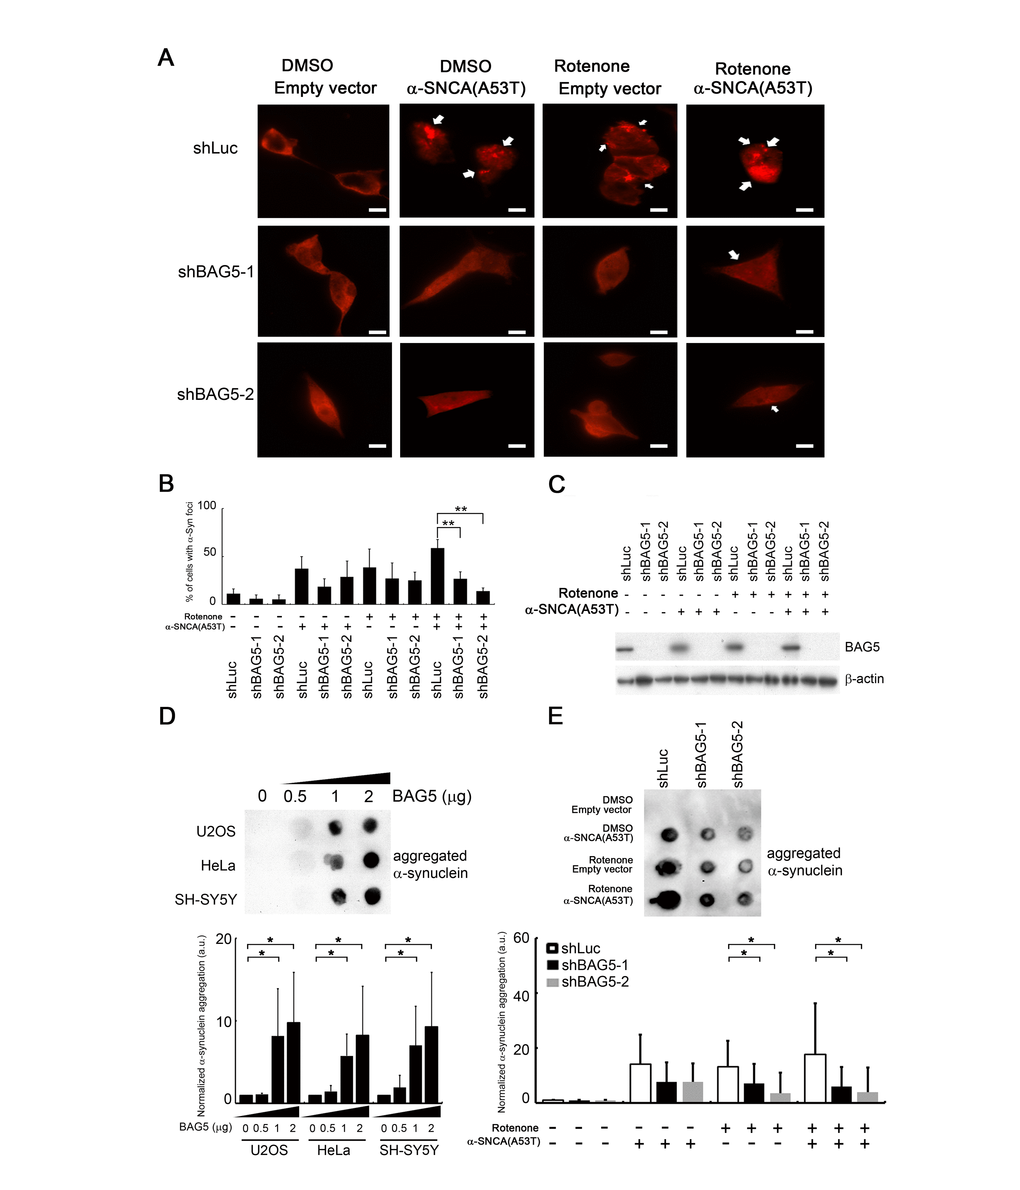 BAG5 expression is crucial for α-synuclein aggregation. (A) After rotenone treatment (10 μM) for 24 h, images of rotenone-treated α-synuclein (A53T)-expressing SH-SY5Y cells following BAG5 knockdown were captured. Arrows indicate α-synuclein-containing foci. Scale bar, 10 μm. (B) Quantified results in (A) are shown as the percentage of cells with foci (Student’s t-test; **, p C) Knockdown of BAG5 in (A) was displayed by Western blot analysis. (D) BAG5 increases SDS-insoluble aggregation of α-synuclein in U2OS, HeLa, and SH-SY5Y cells. α-Synuclein aggregation was detected by the filter-trap assay in cells transfected with various amounts of a BAG5-expressing plasmid. The lysate was diluted in SDS and filtered through nitrocellulose membranes. α-Synuclein immunostaining was detected by the α-synuclein antibody. A representative image and the densitometry data are shown (a.u., arbitrary unit). The values of α-synuclein aggregation were normalized to the amount of aggregation in the empty vector control (Student’s t-test; *, p E) SDS-insoluble α-synuclein aggregation in rotenone-treated and/or α-synuclein (A53T)-expressed SH-SY5Y cells is BAG5-dependent. α-Synuclein aggregation was detected by the filter-trap assay. The values of α-synuclein aggregation were normalized to the amount of aggregation in the vector or solvent control (Student’s t-test; *, p 